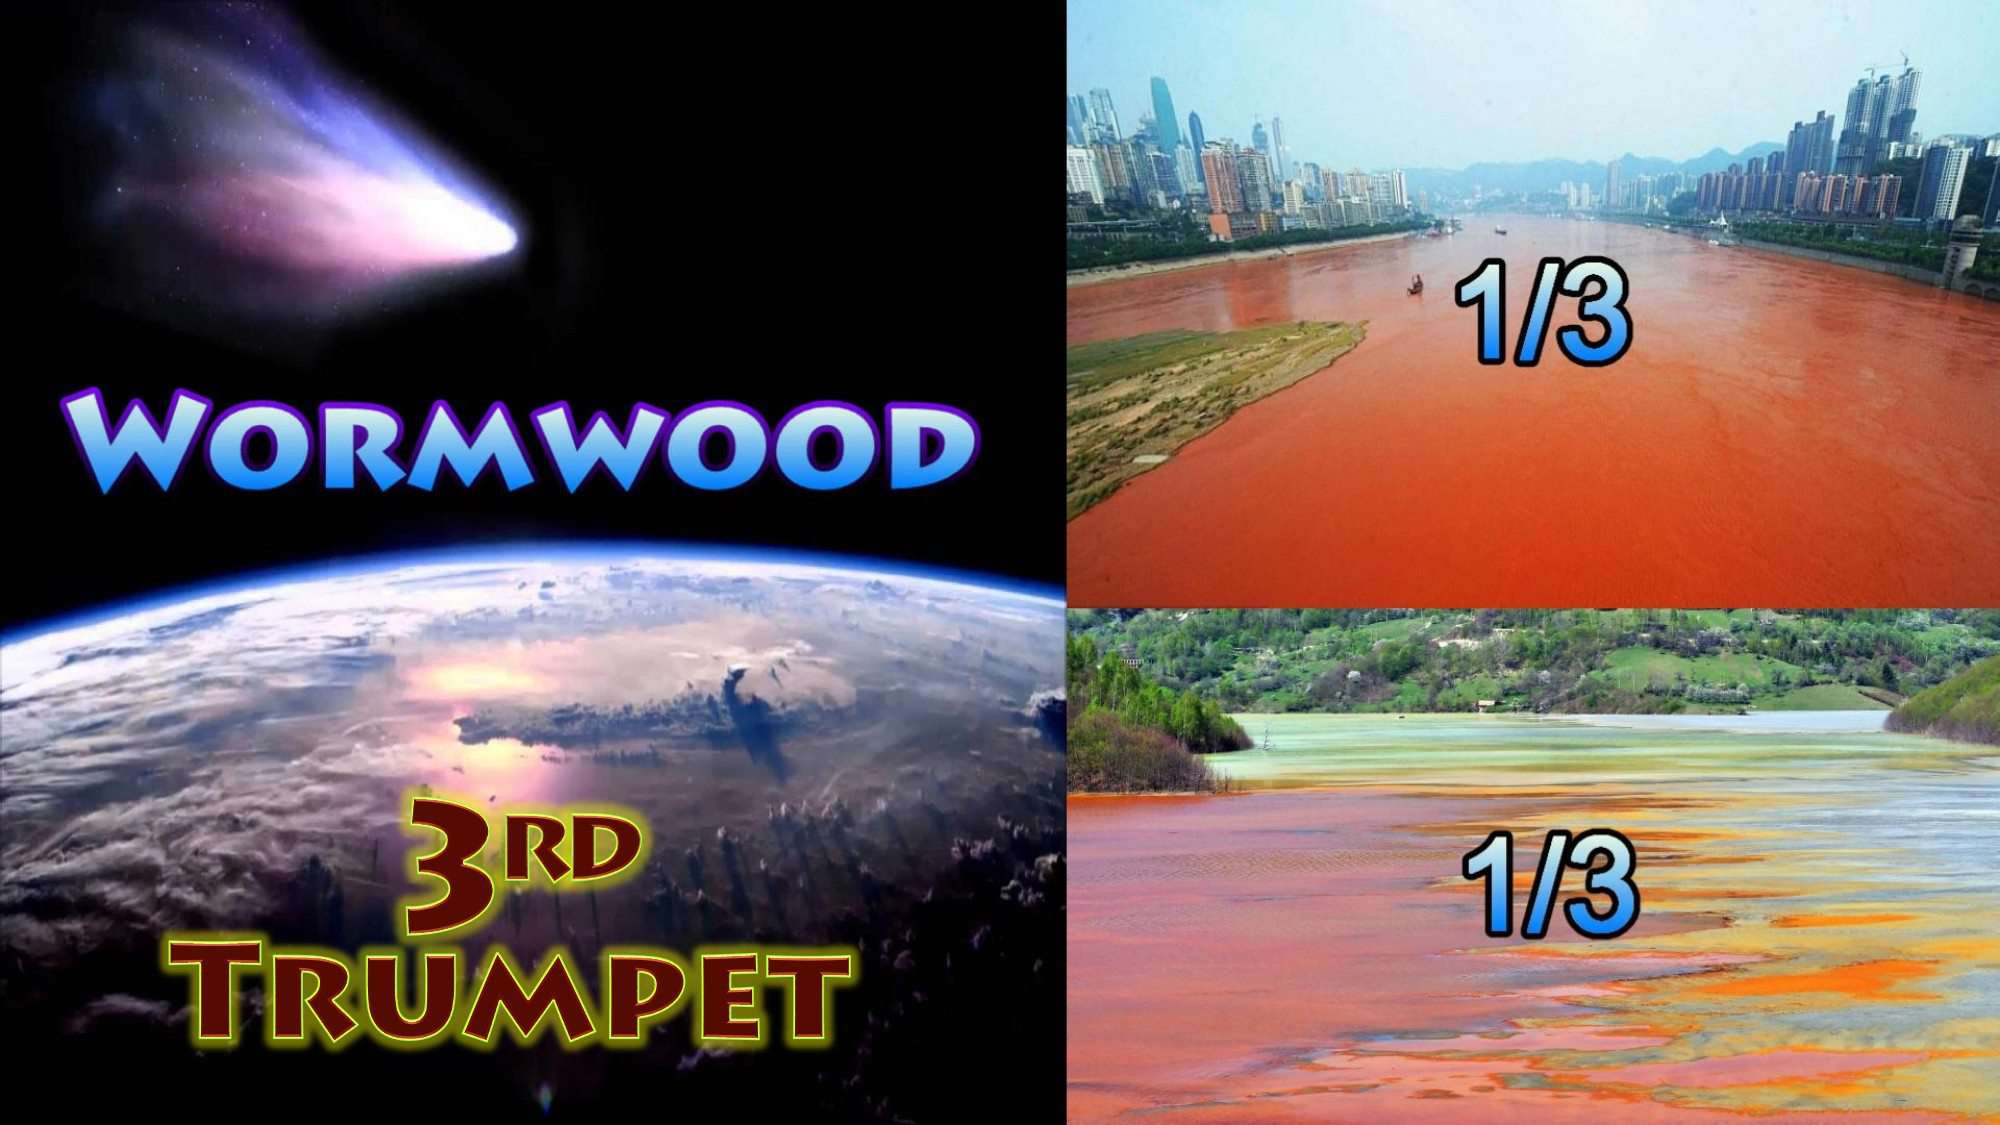 Third Trumpet,Star fell,Wormwood,Third Rivers,third Springs,Bitter,Poison Water,Seven Trumpets,Book of Revelation,Revelation Chapter 8,Apocalypse